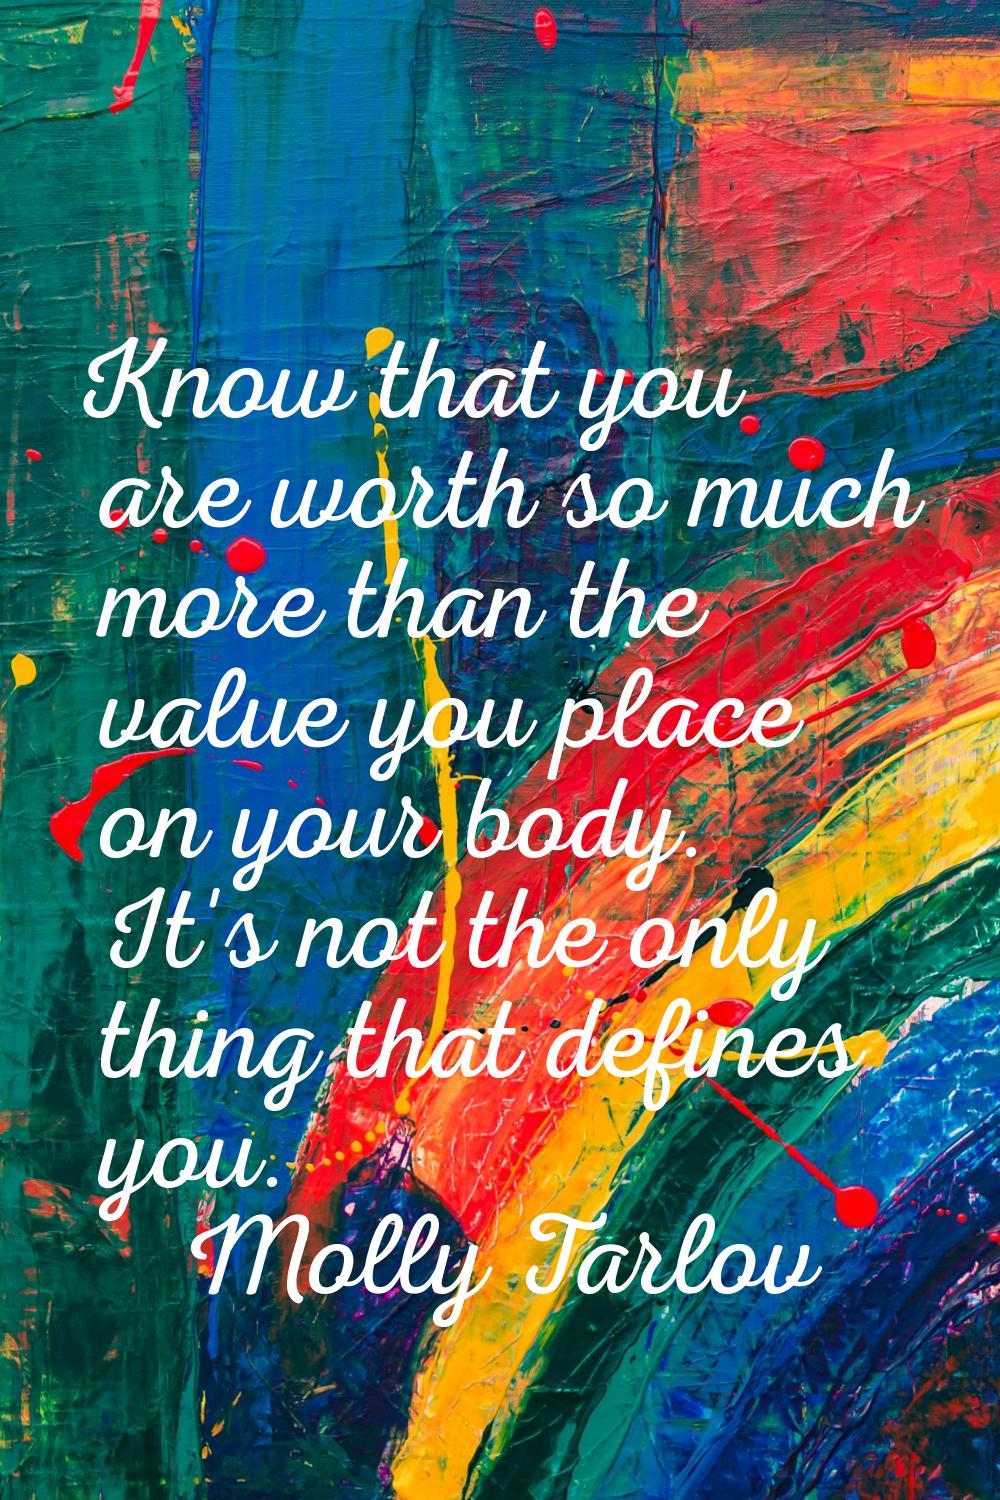 Know that you are worth so much more than the value you place on your body. It's not the only thing